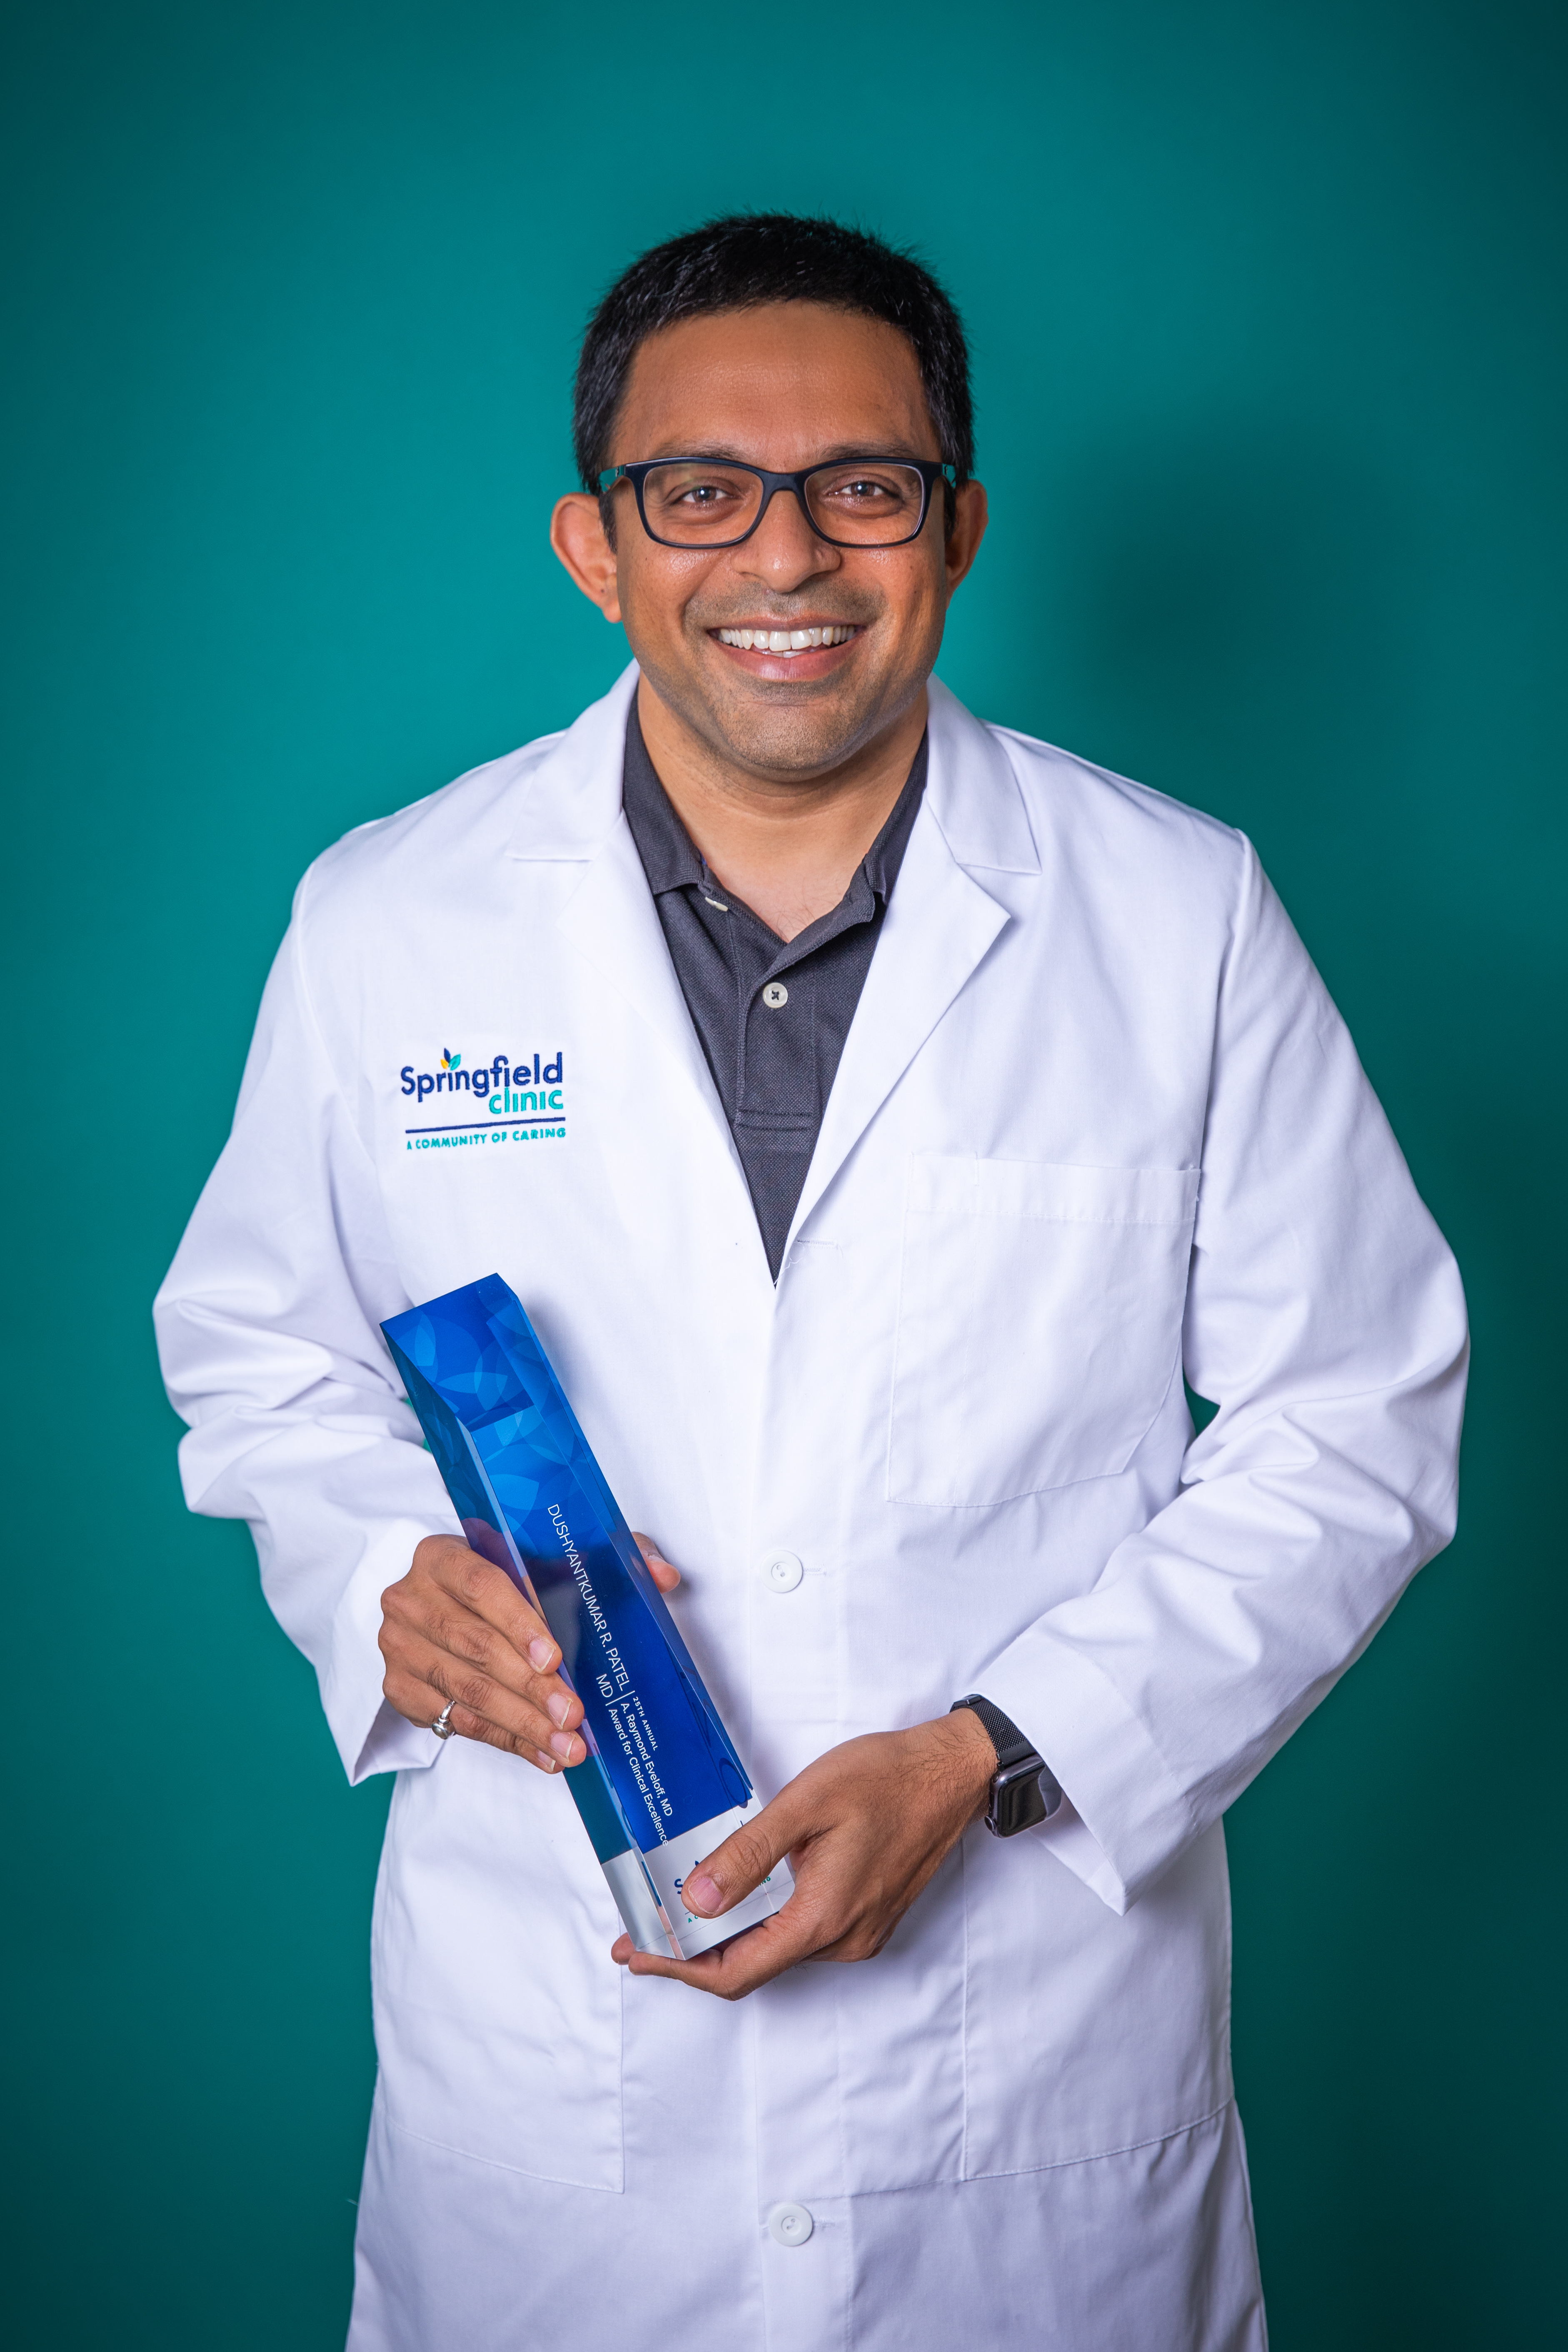 Dushyantkumar R. Patel, MD, holding the 2021 Eveloff award in front of a green background.